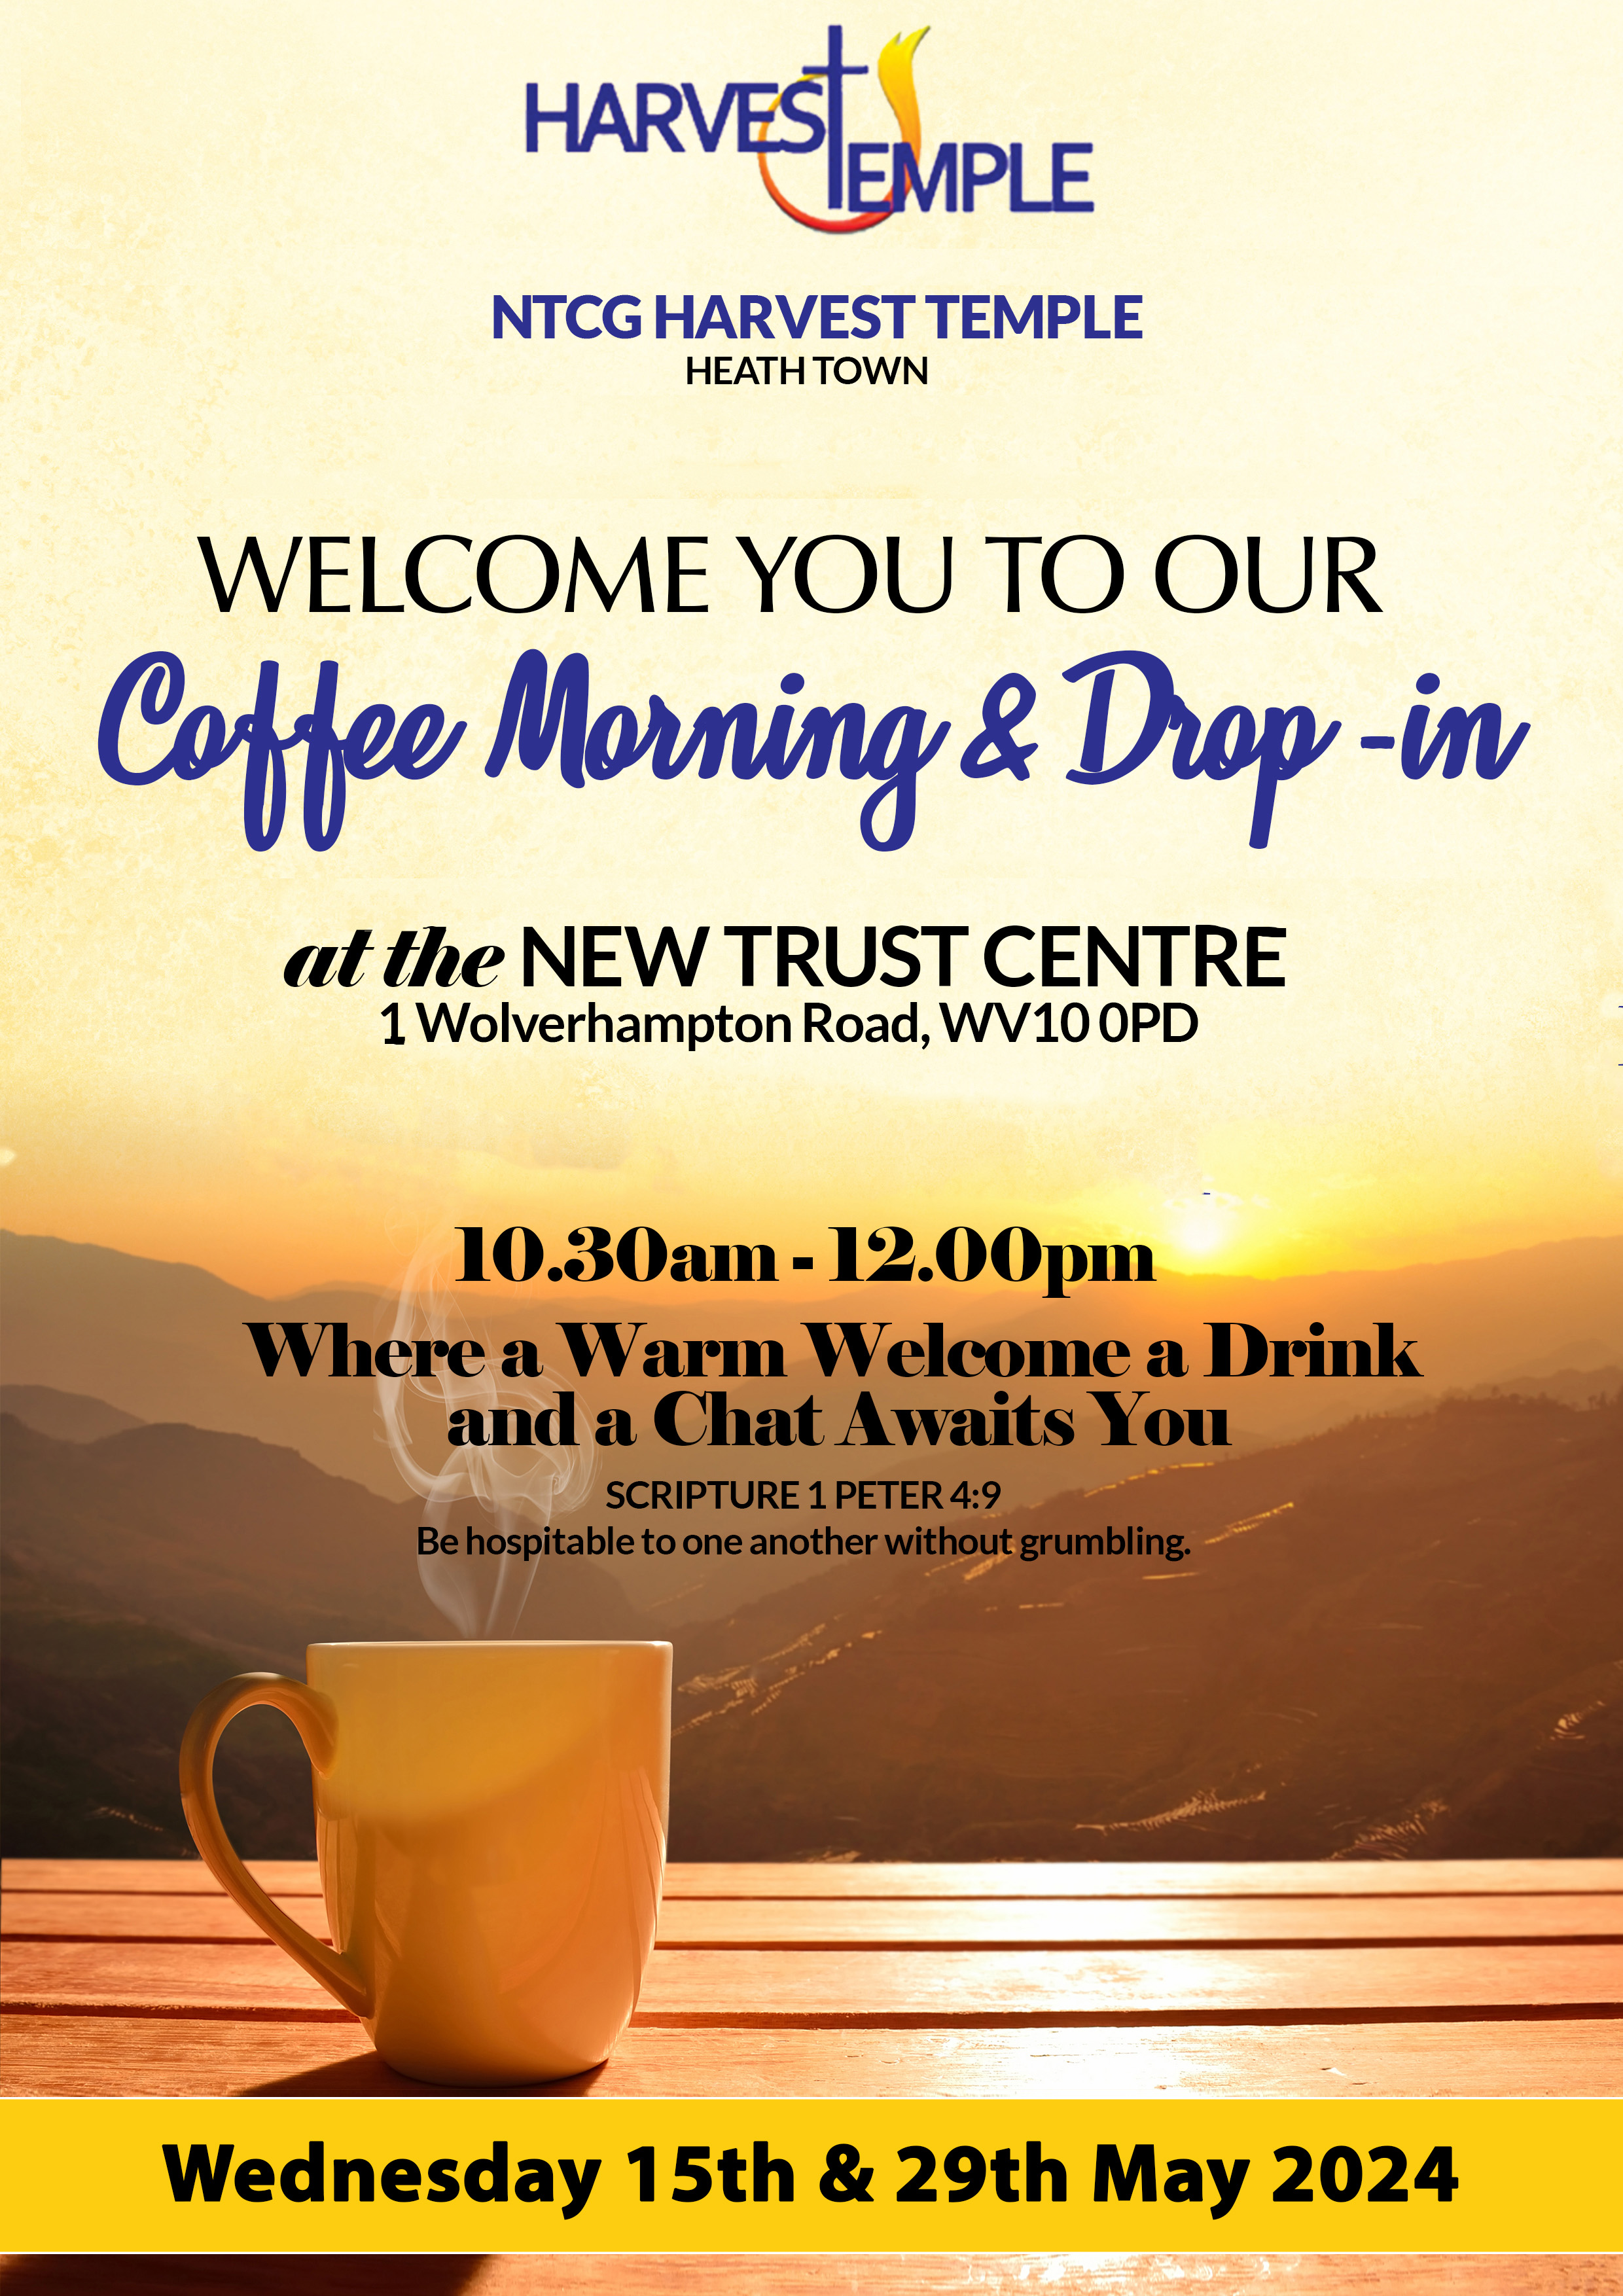 harvest temple coffee morning flyer